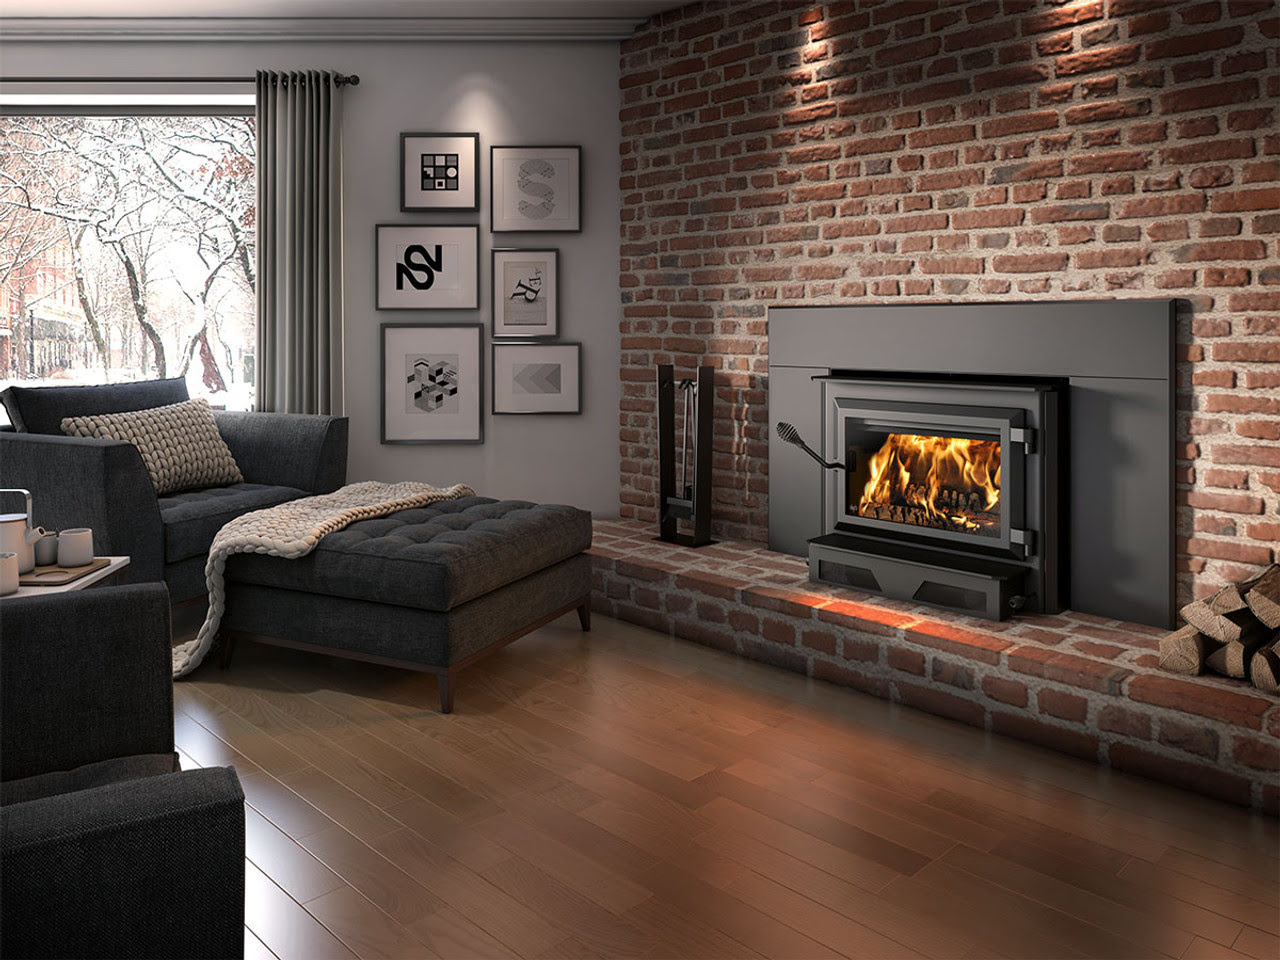 How Much Does A Fireplace Insert Cost